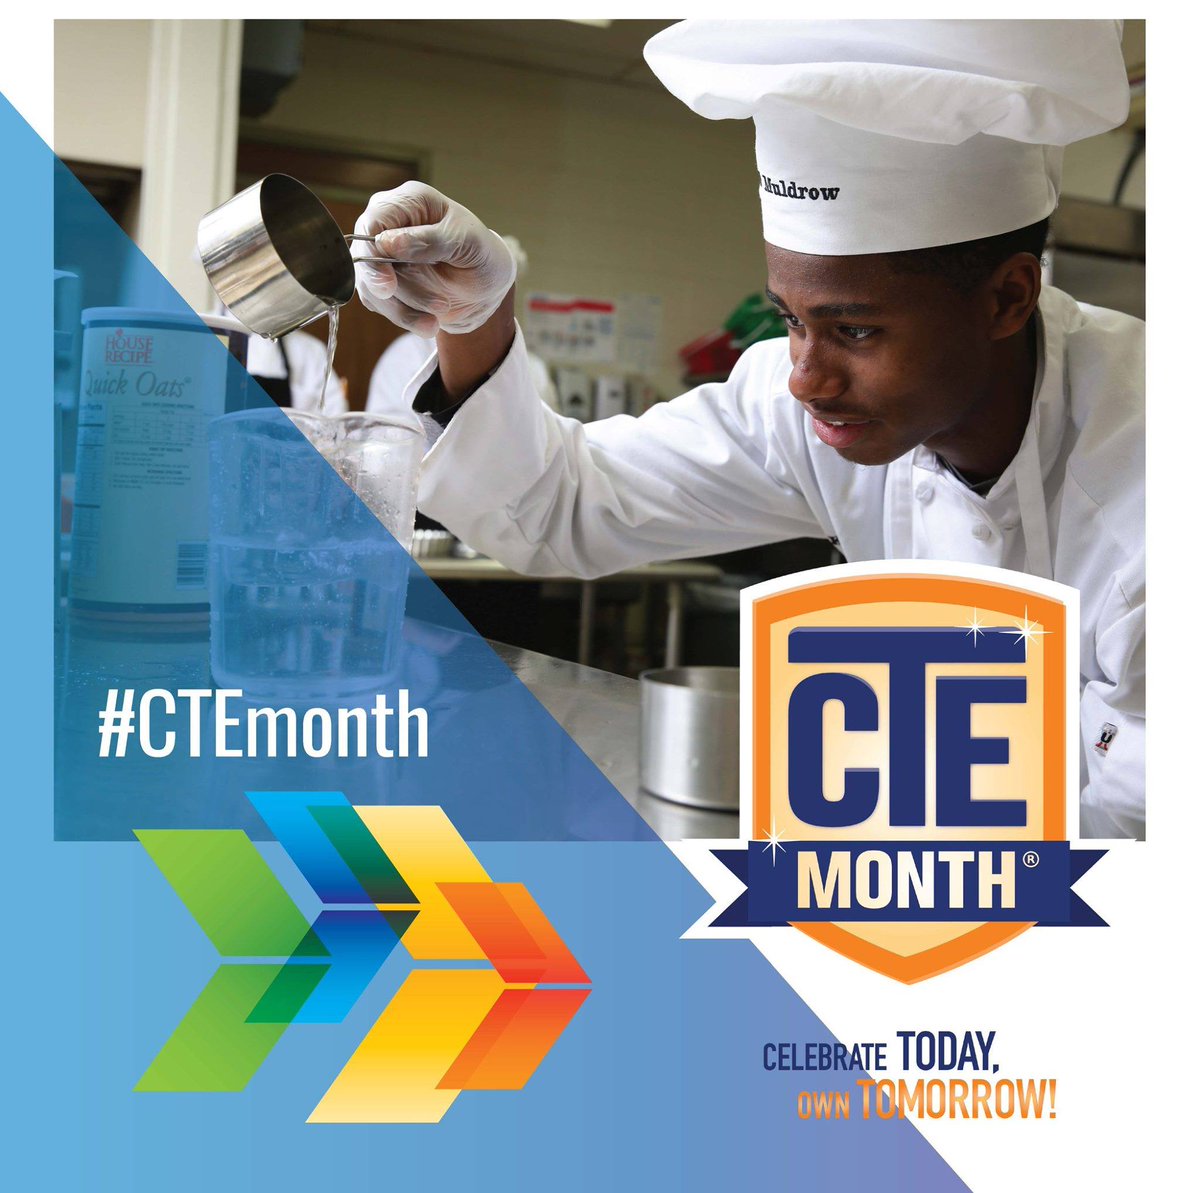 Happy February! This month we celebrate #BlackHistory and #CTE. There are AMAZING historical figures to learn about & technical education career highlights. 
...
#careerandtechnicaleducation #bocesproud #cteawesome #blackhistorymonth2021 #blackhistorymonth #CTEmonth #CTEmonth2021